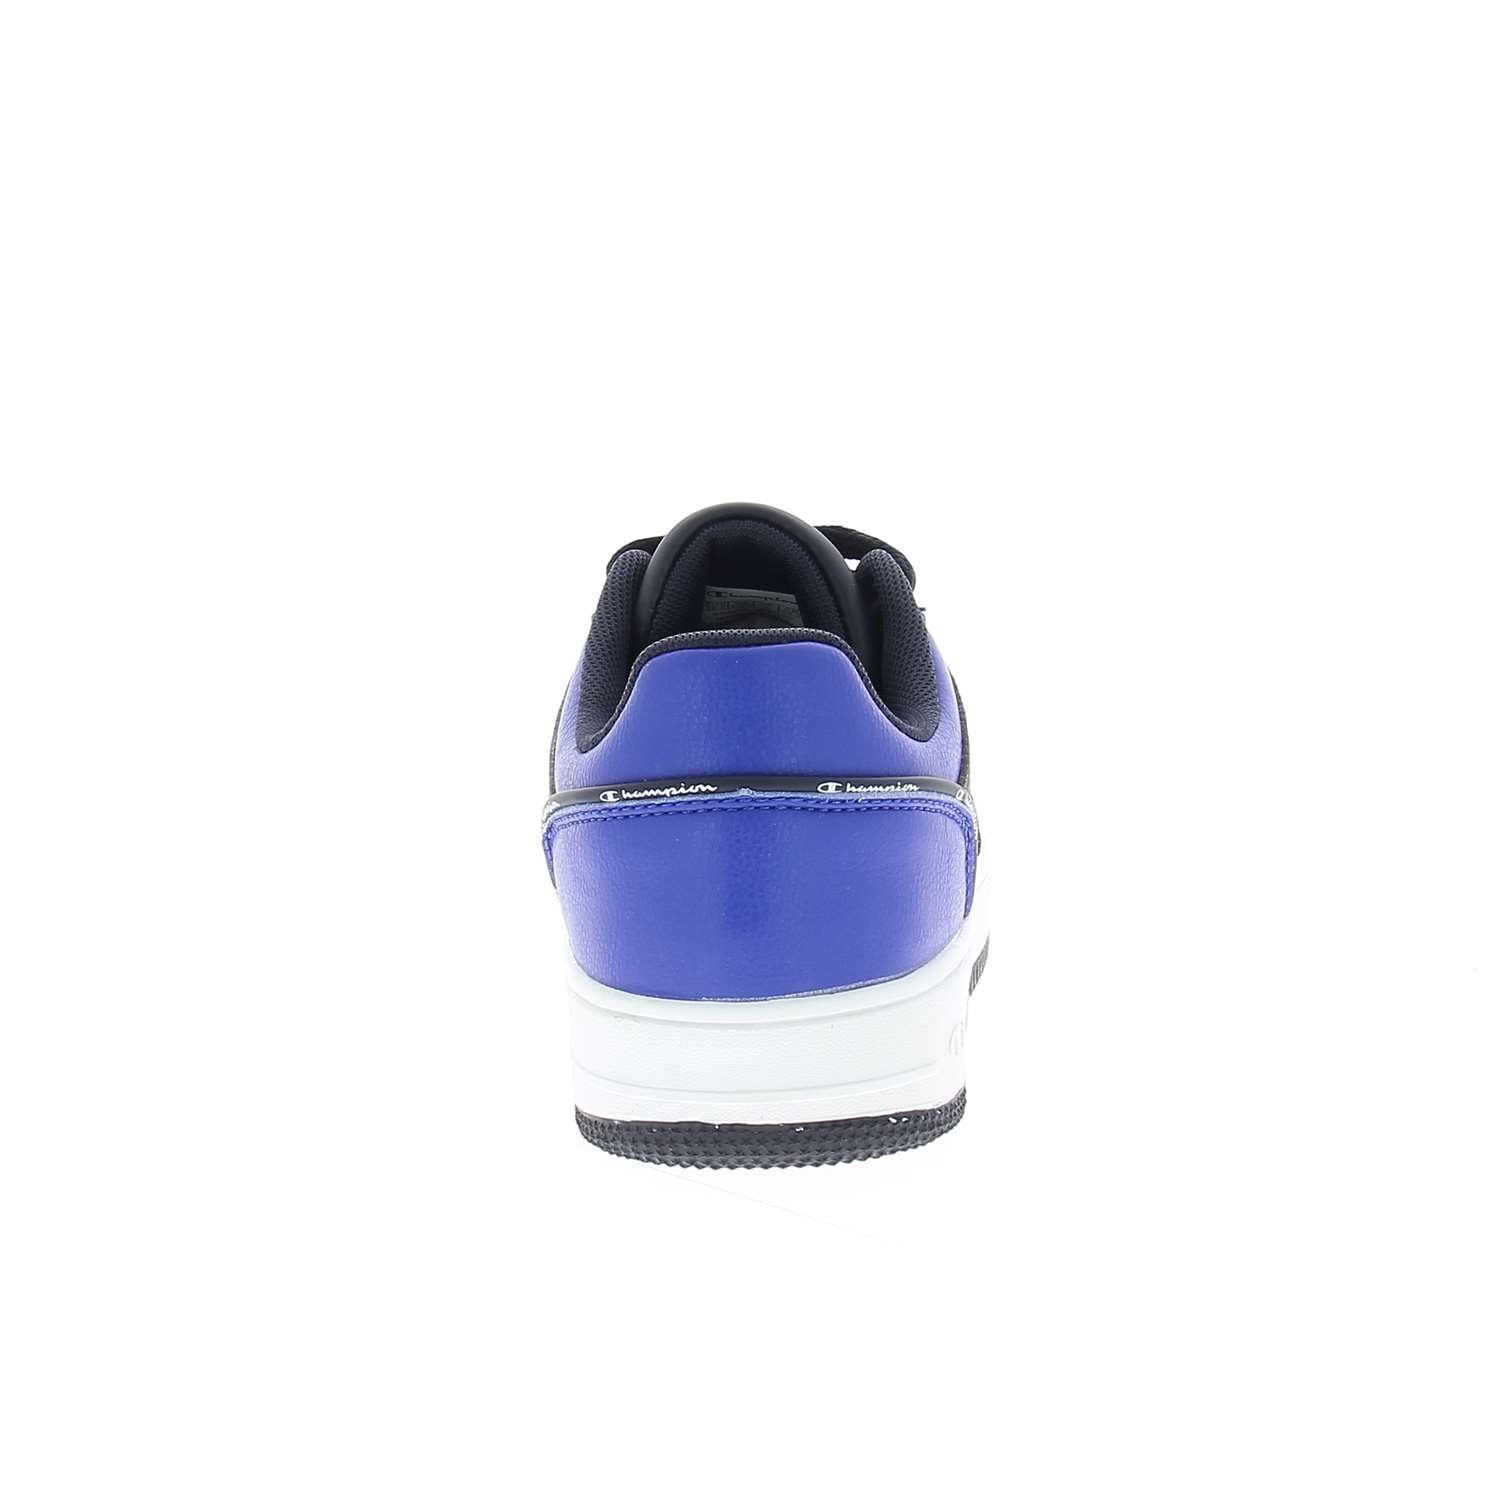 04 - REBOUND 2.0 LOW GS - CHAMPION - Baskets - Synthétique